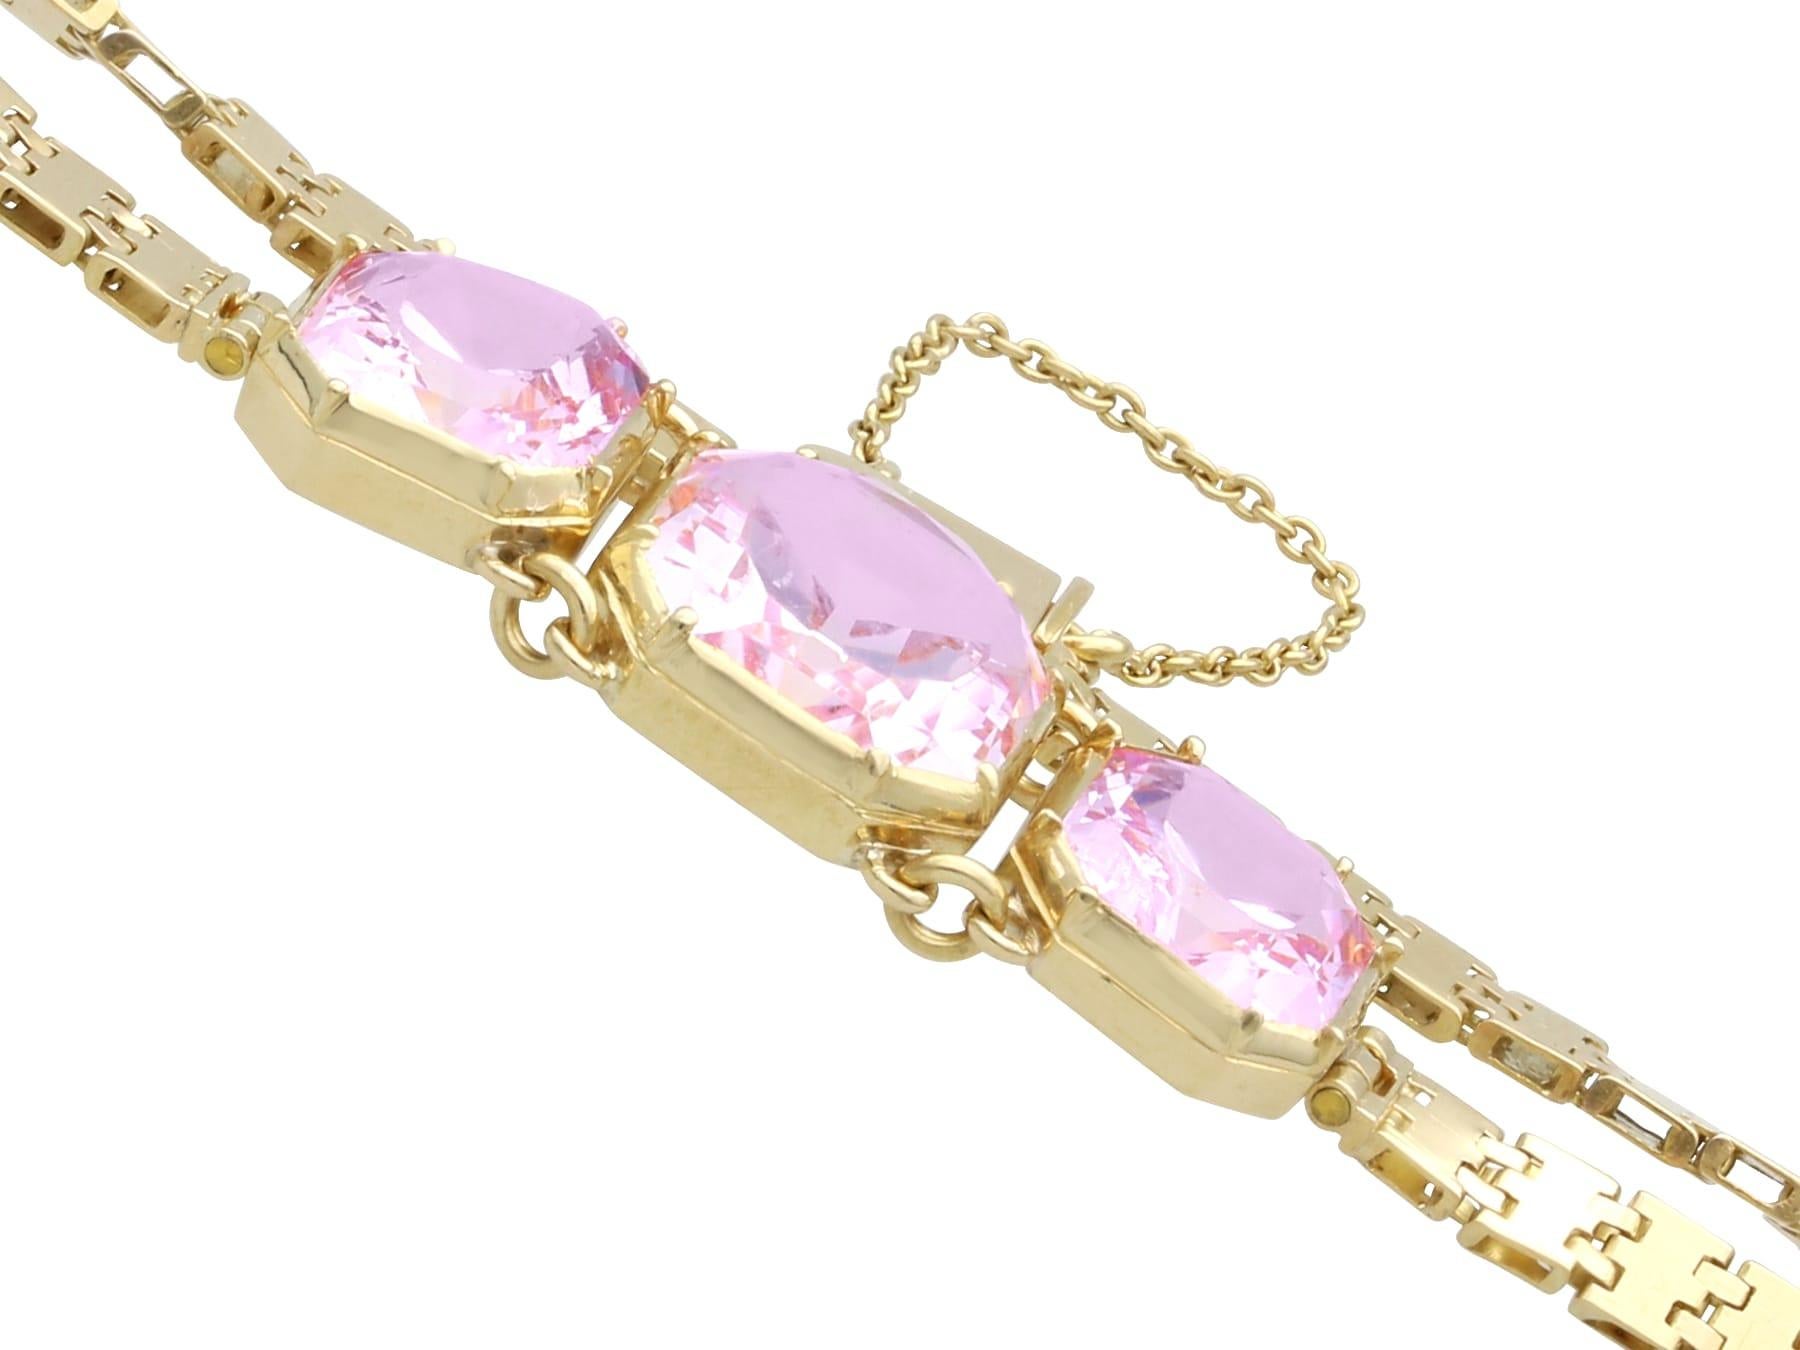 Square Cut Antique 13.20Ct Pink Topaz and 18k Yellow Gold Bracelet Circa 1840 For Sale